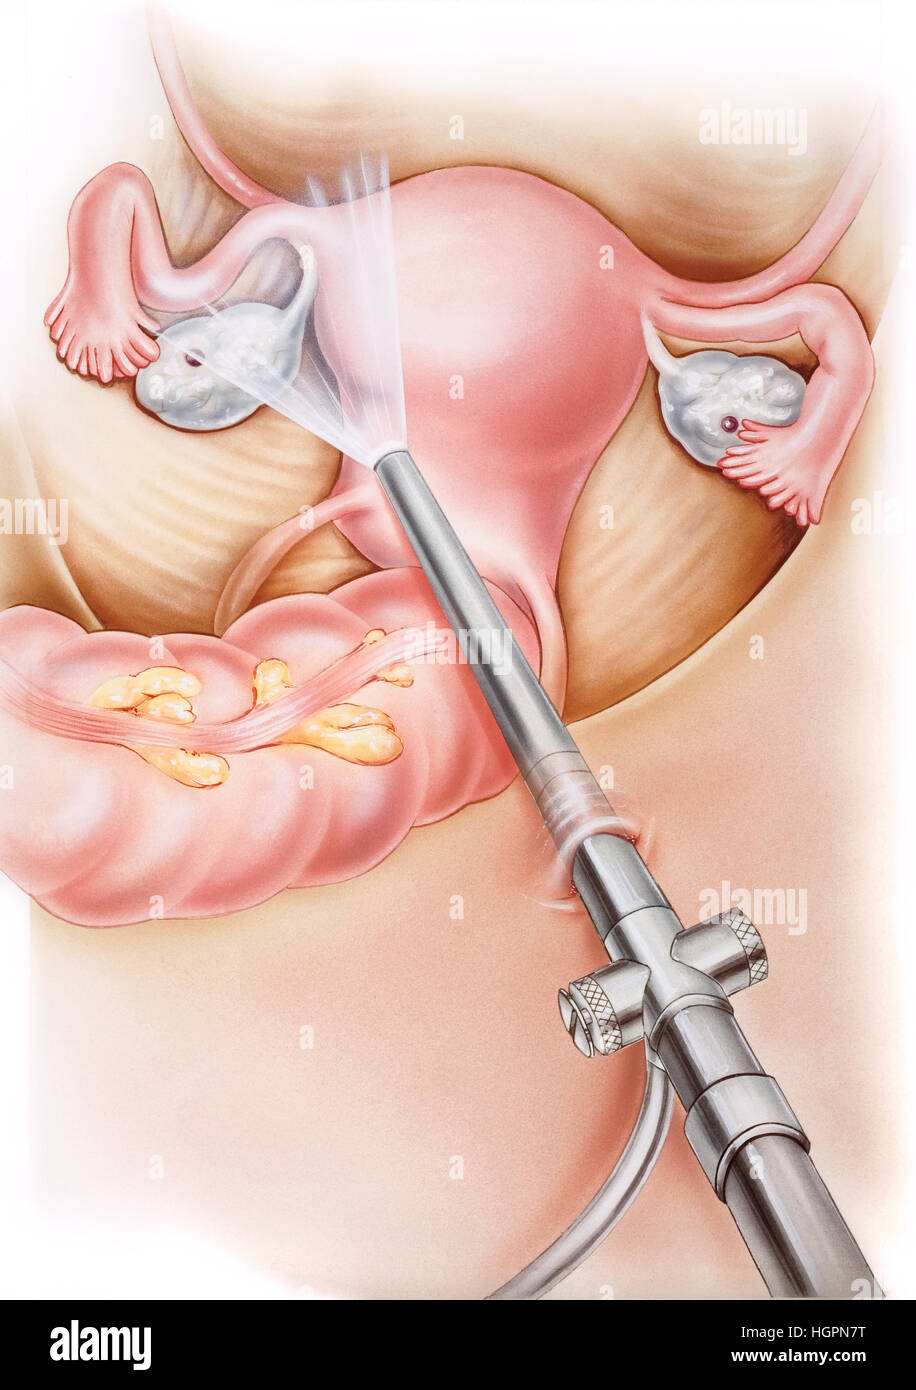 Uterus - Laparoscopy, in which a small incision is made in the abdomen and the laparoscope is inserted to view internal female organs. The ovaries, fa Stock Photo